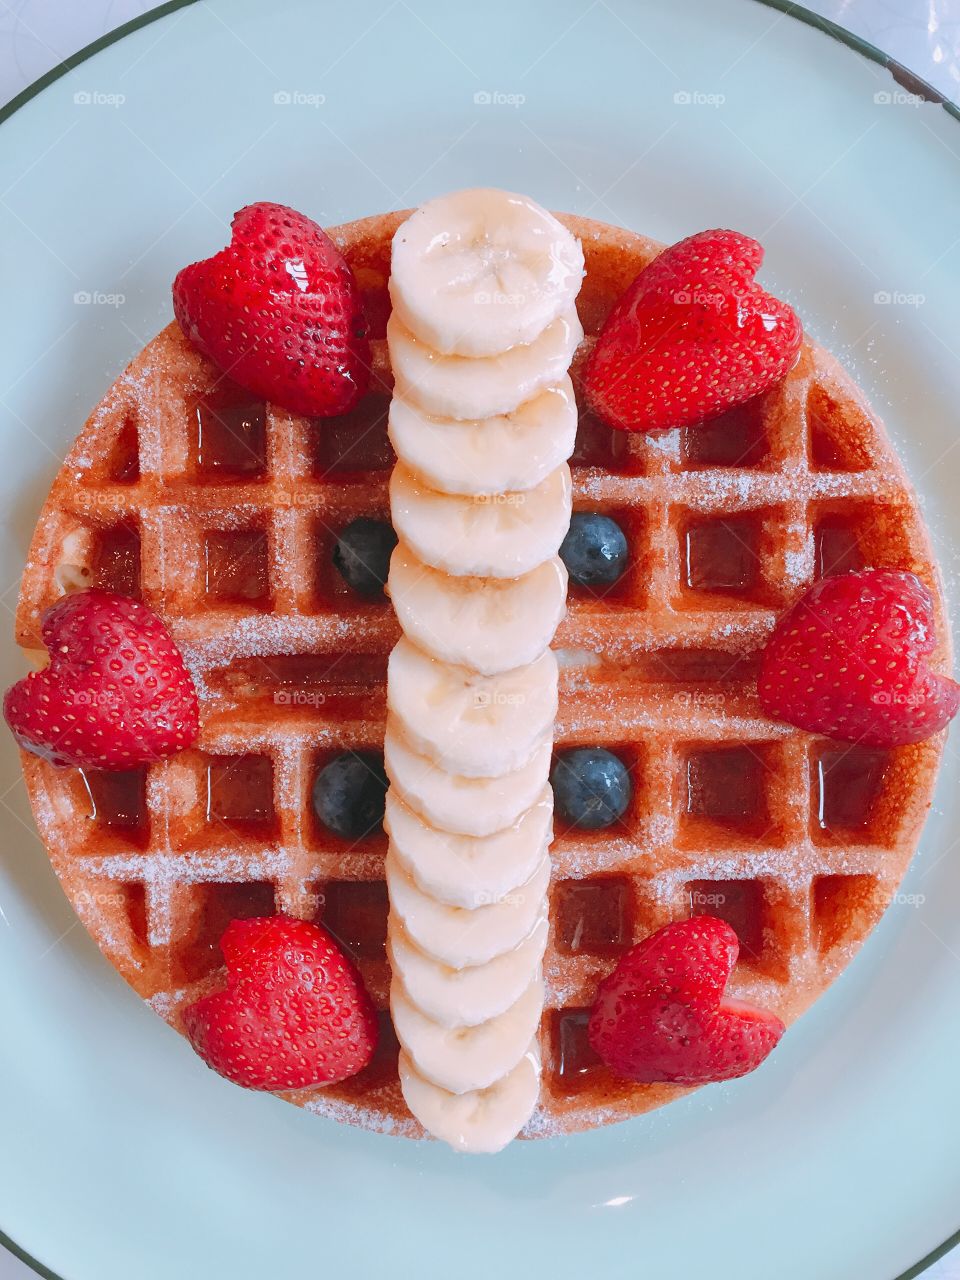 Buttermilk waffle with fruit 